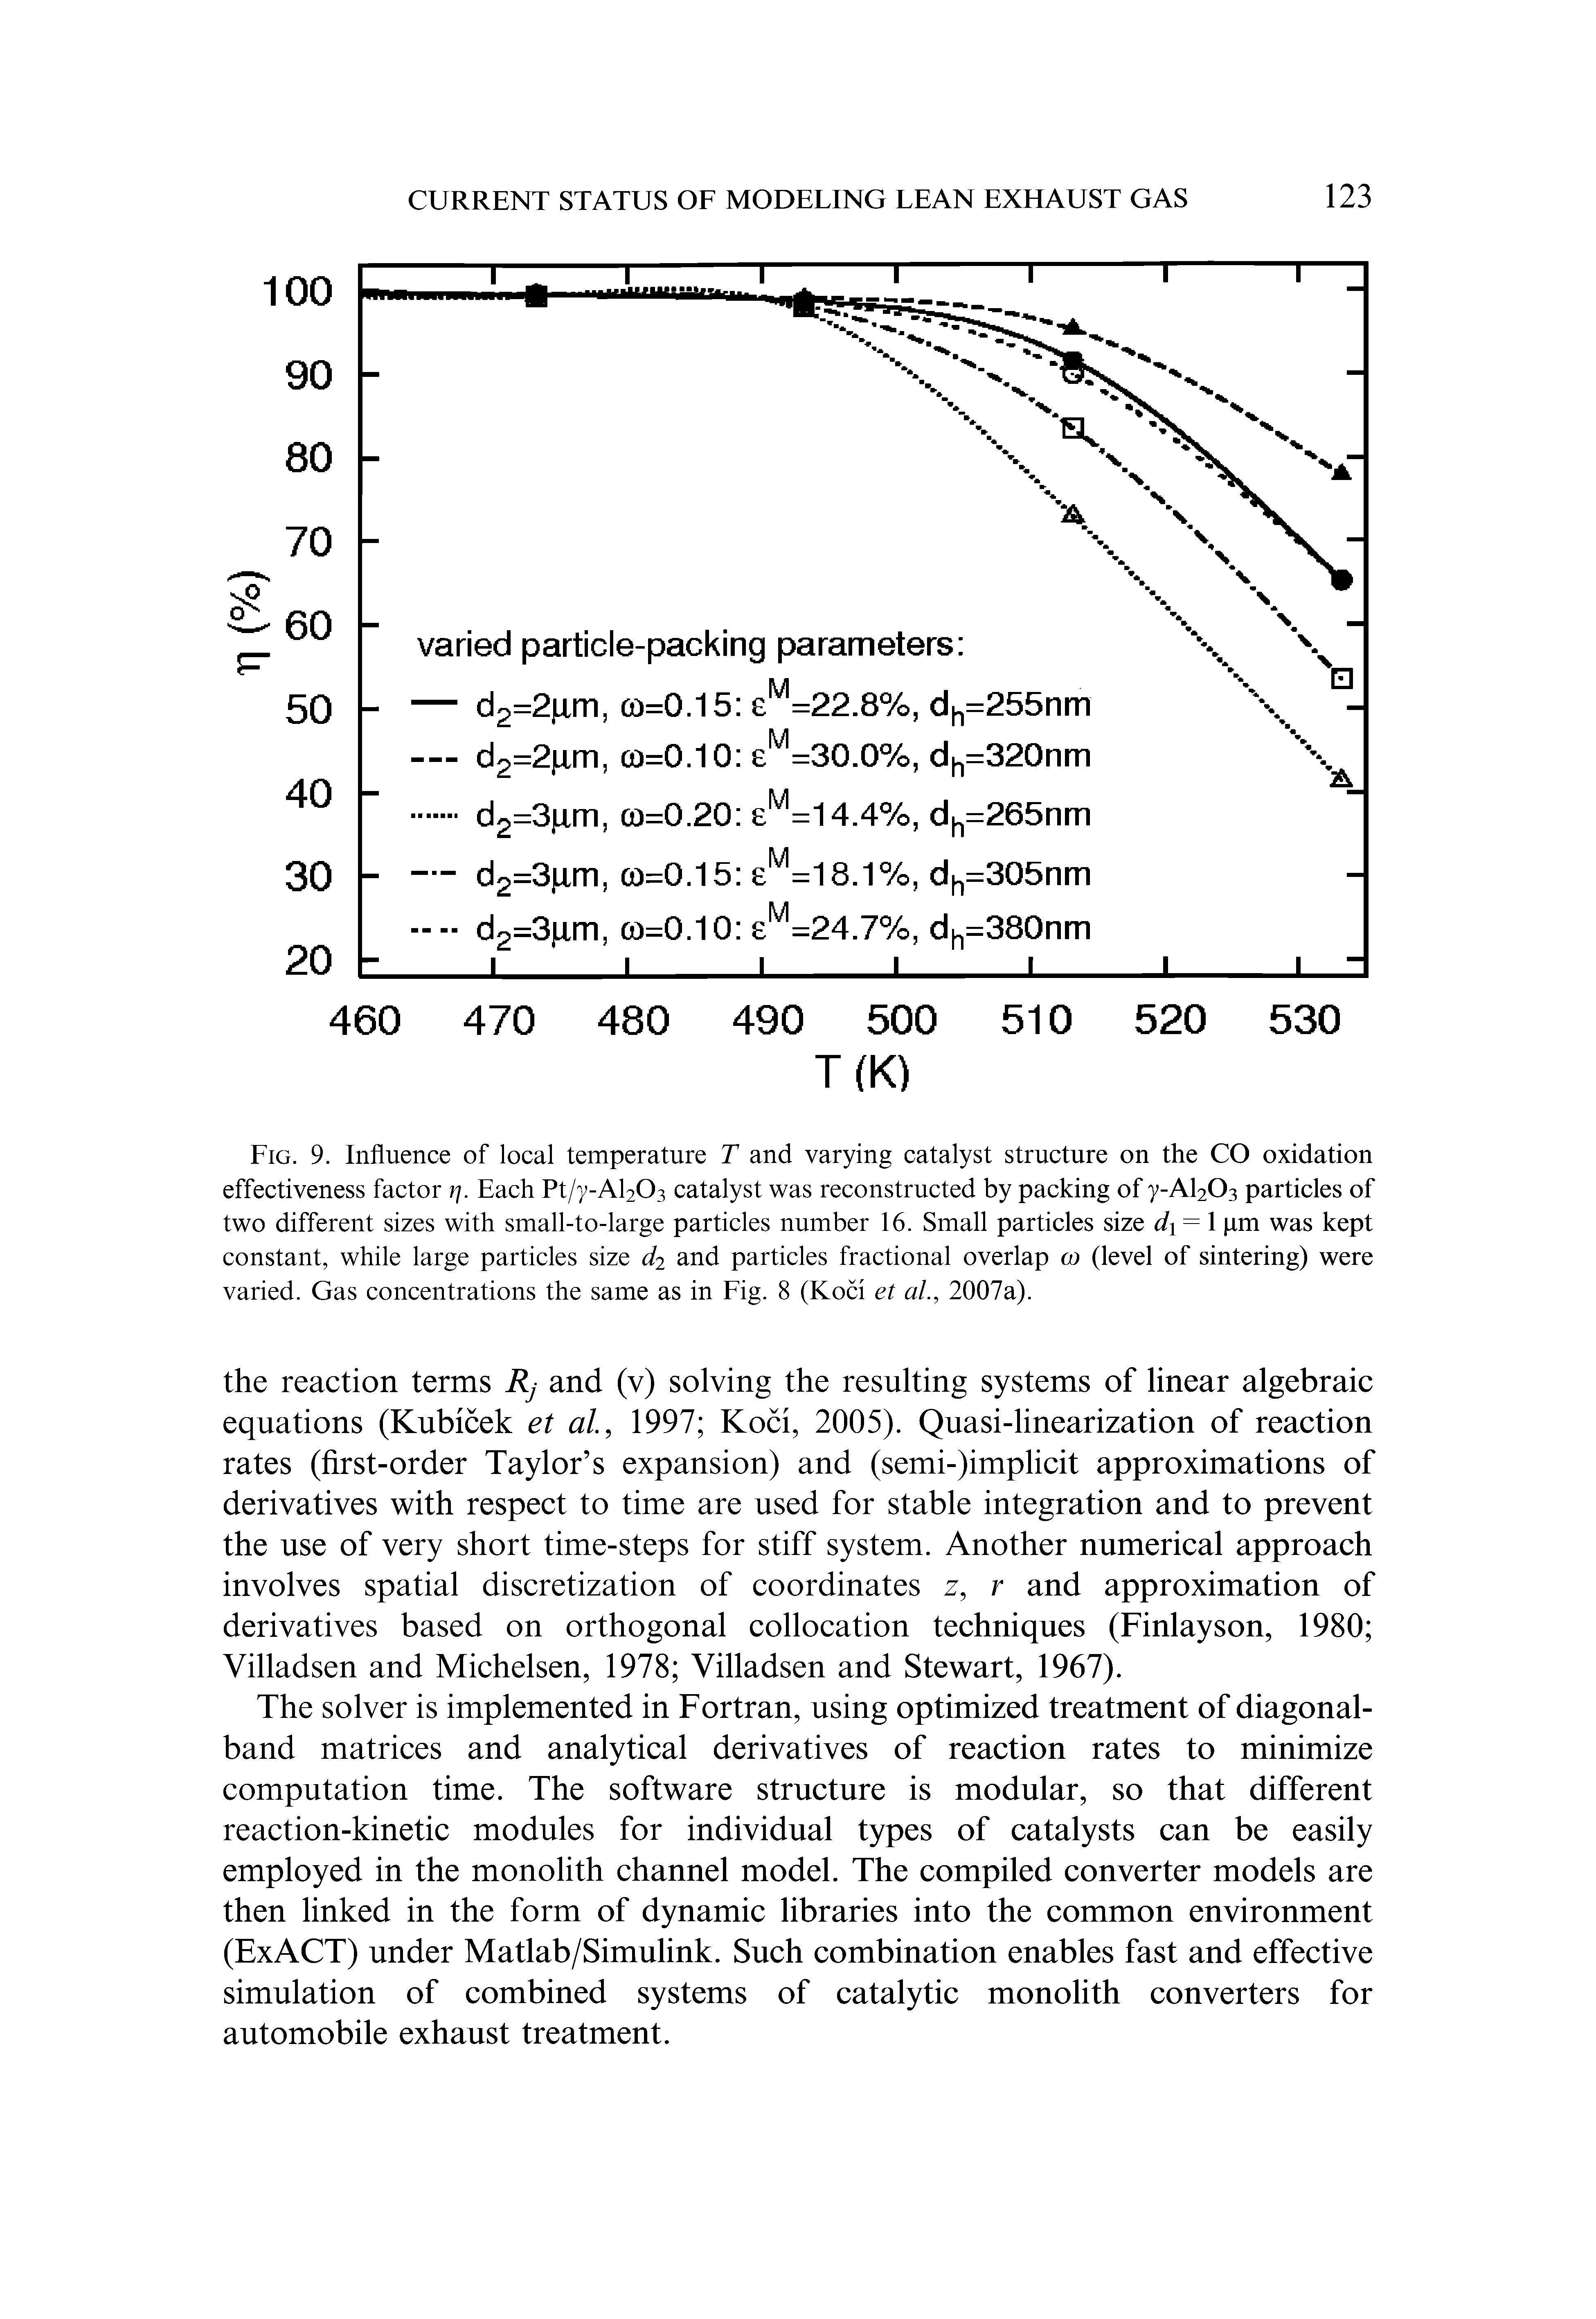 Fig. 9. Influence of local temperature T and varying catalyst structure on the CO oxidation effectiveness factor . Each Pt/y-Al203 catalyst was reconstructed by packing of y-Al203 particles of two different sizes with small-to-large particles number 16. Small particles size d = 1 pm was kept constant, while large particles size <72 and particles fractional overlap (level of sintering) were varied. Gas concentrations the same as in Fig. 8 (Koci et al., 2007a).